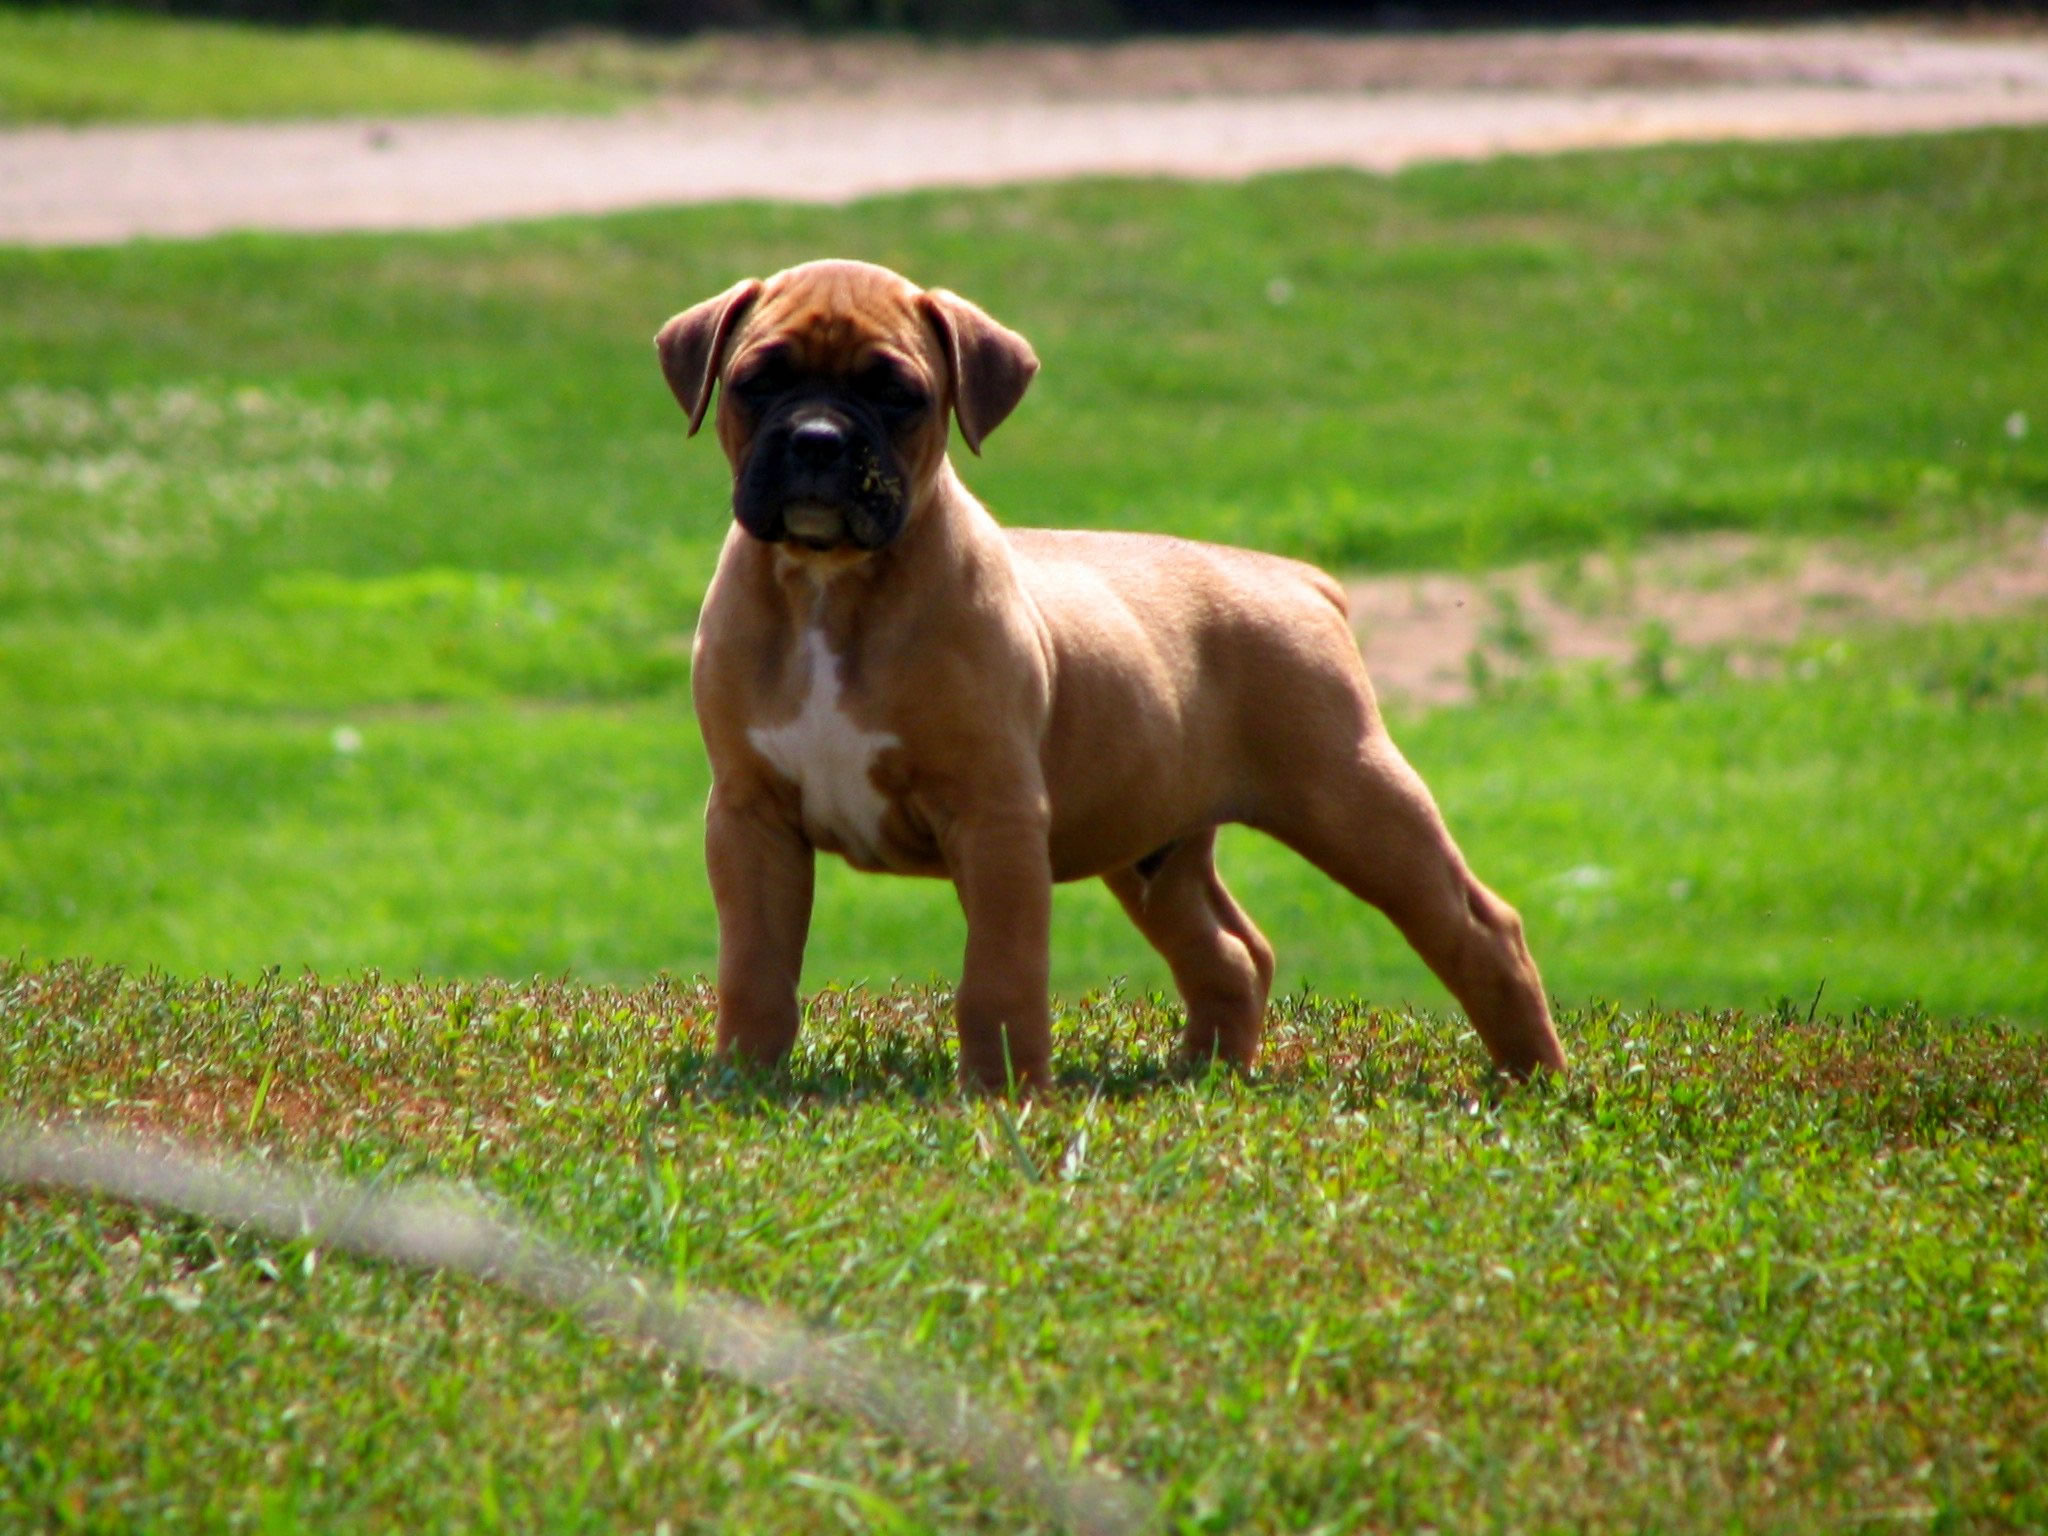 Fawn Boxer puppy wallpaper (2) - My Doggy Rocks